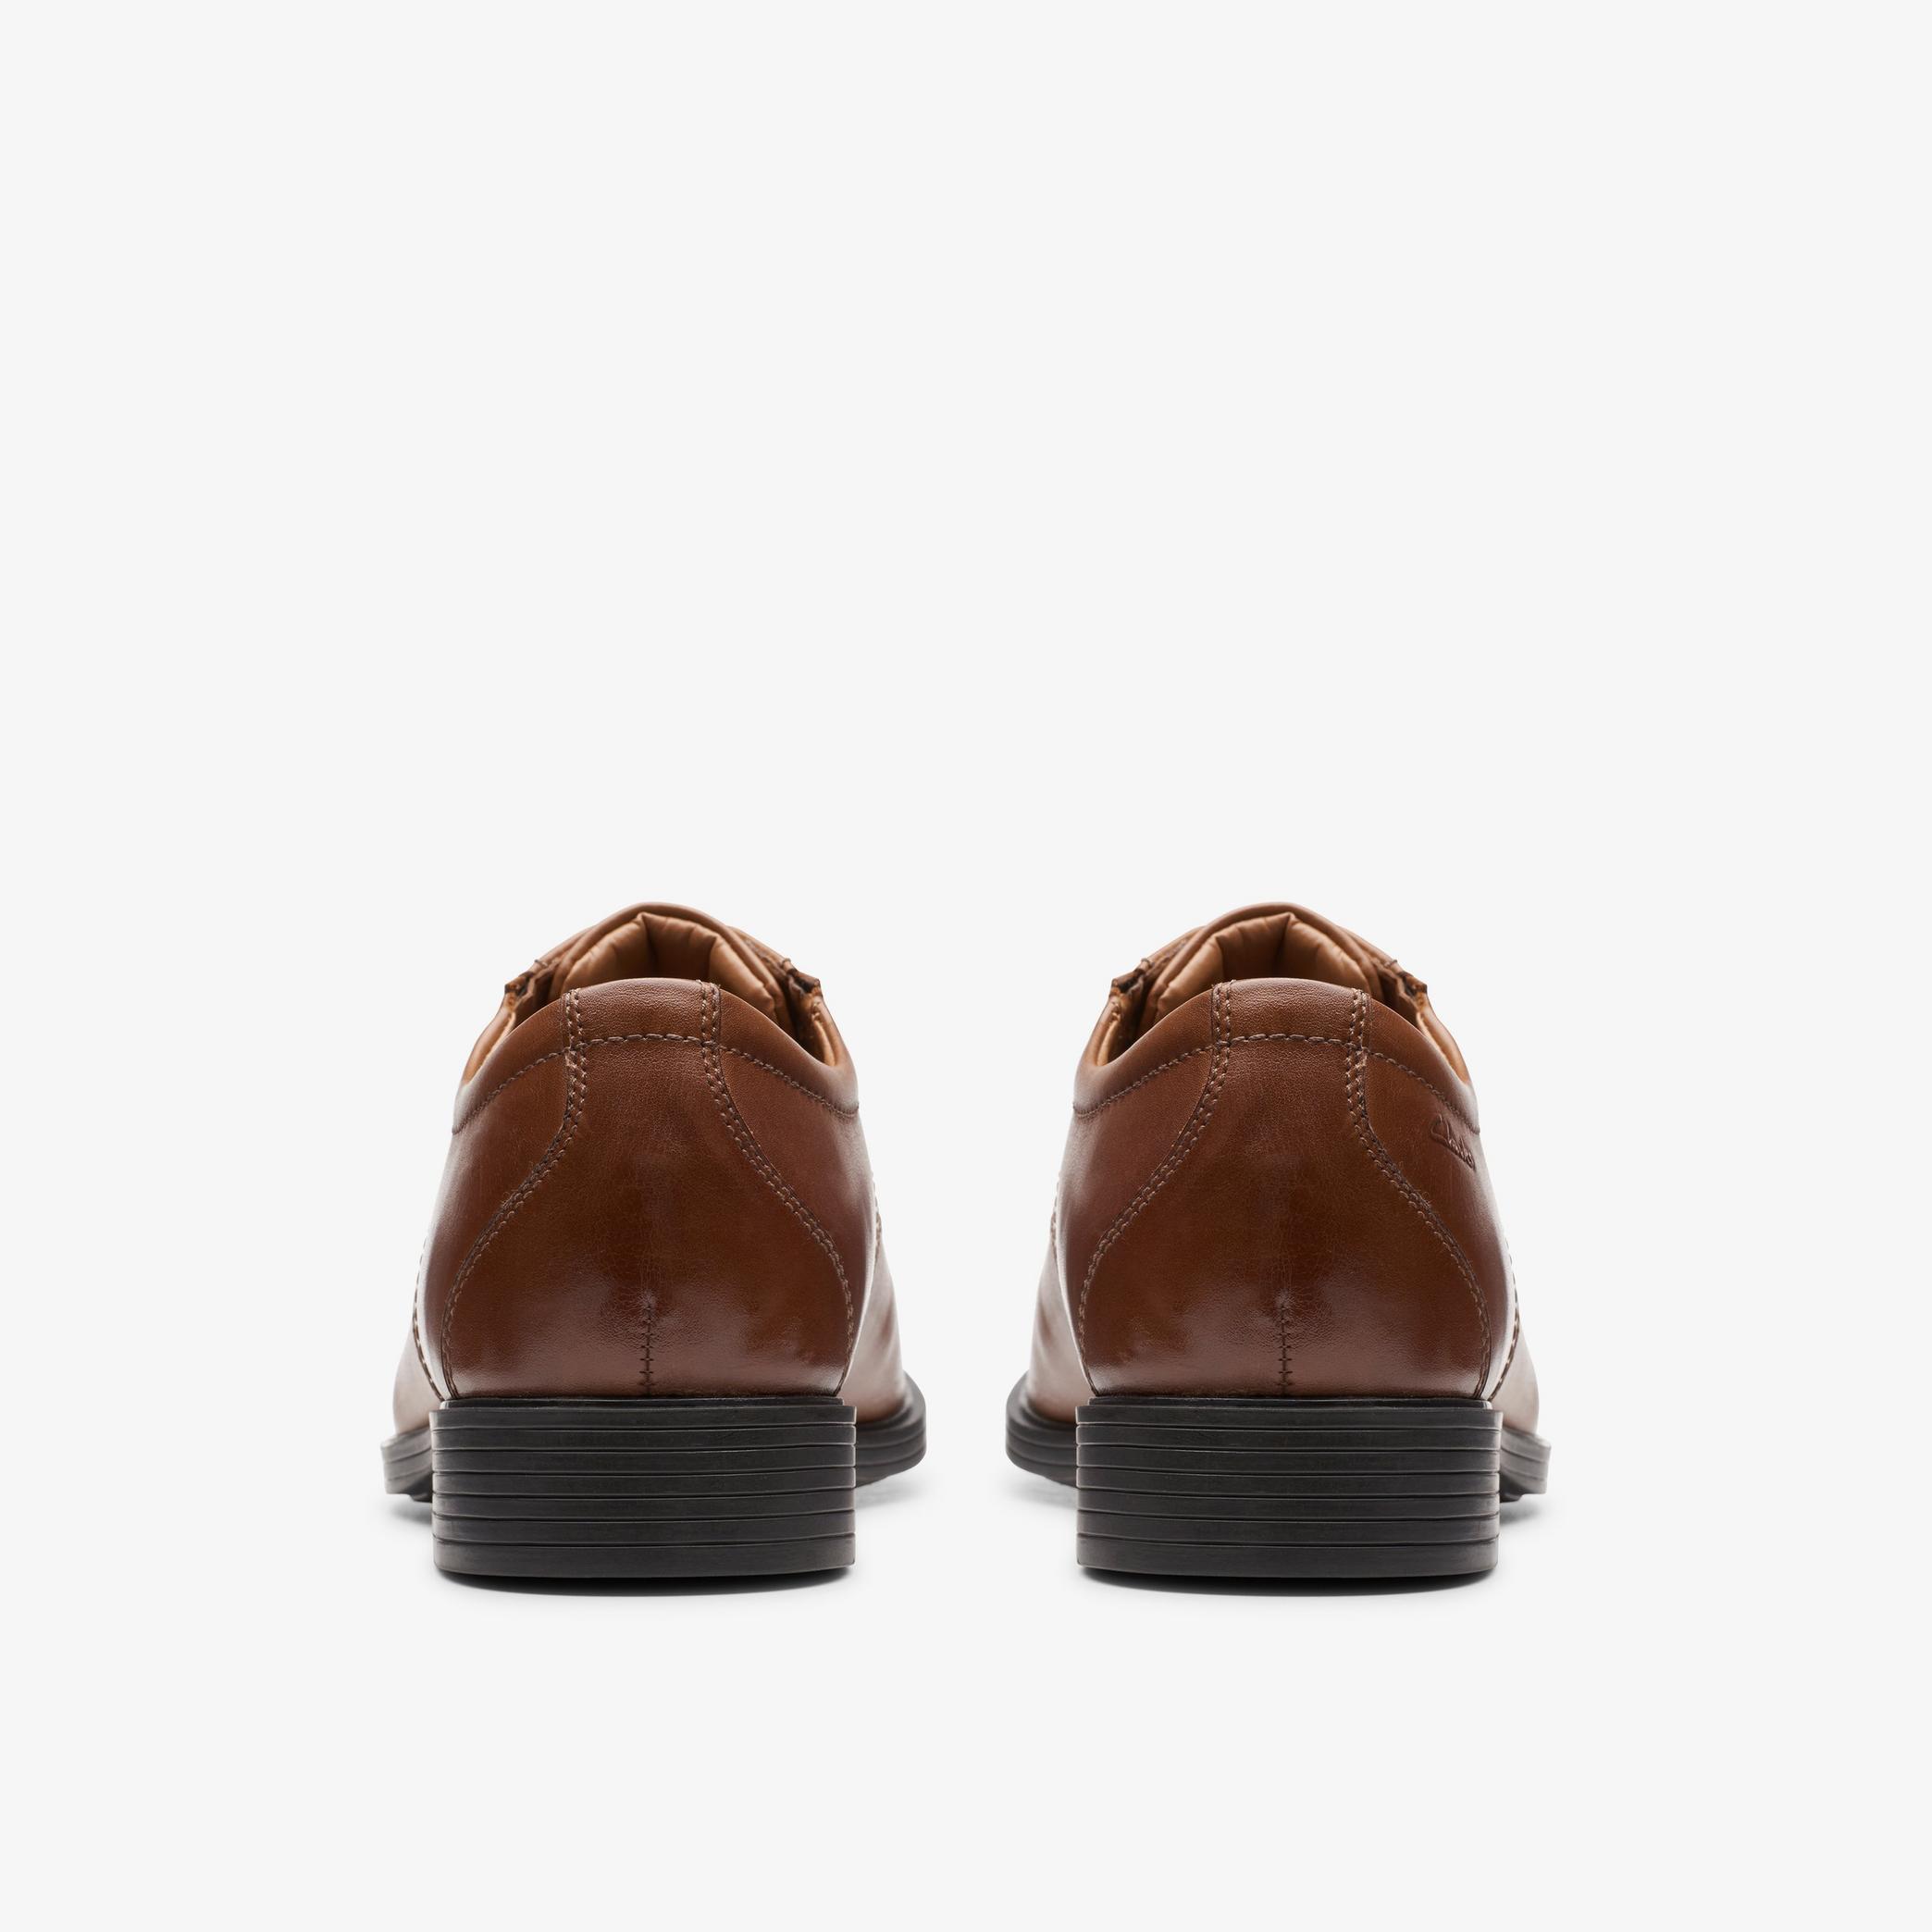 Whiddon Cap Dark Tan Leather Oxford Shoes, view 5 of 6